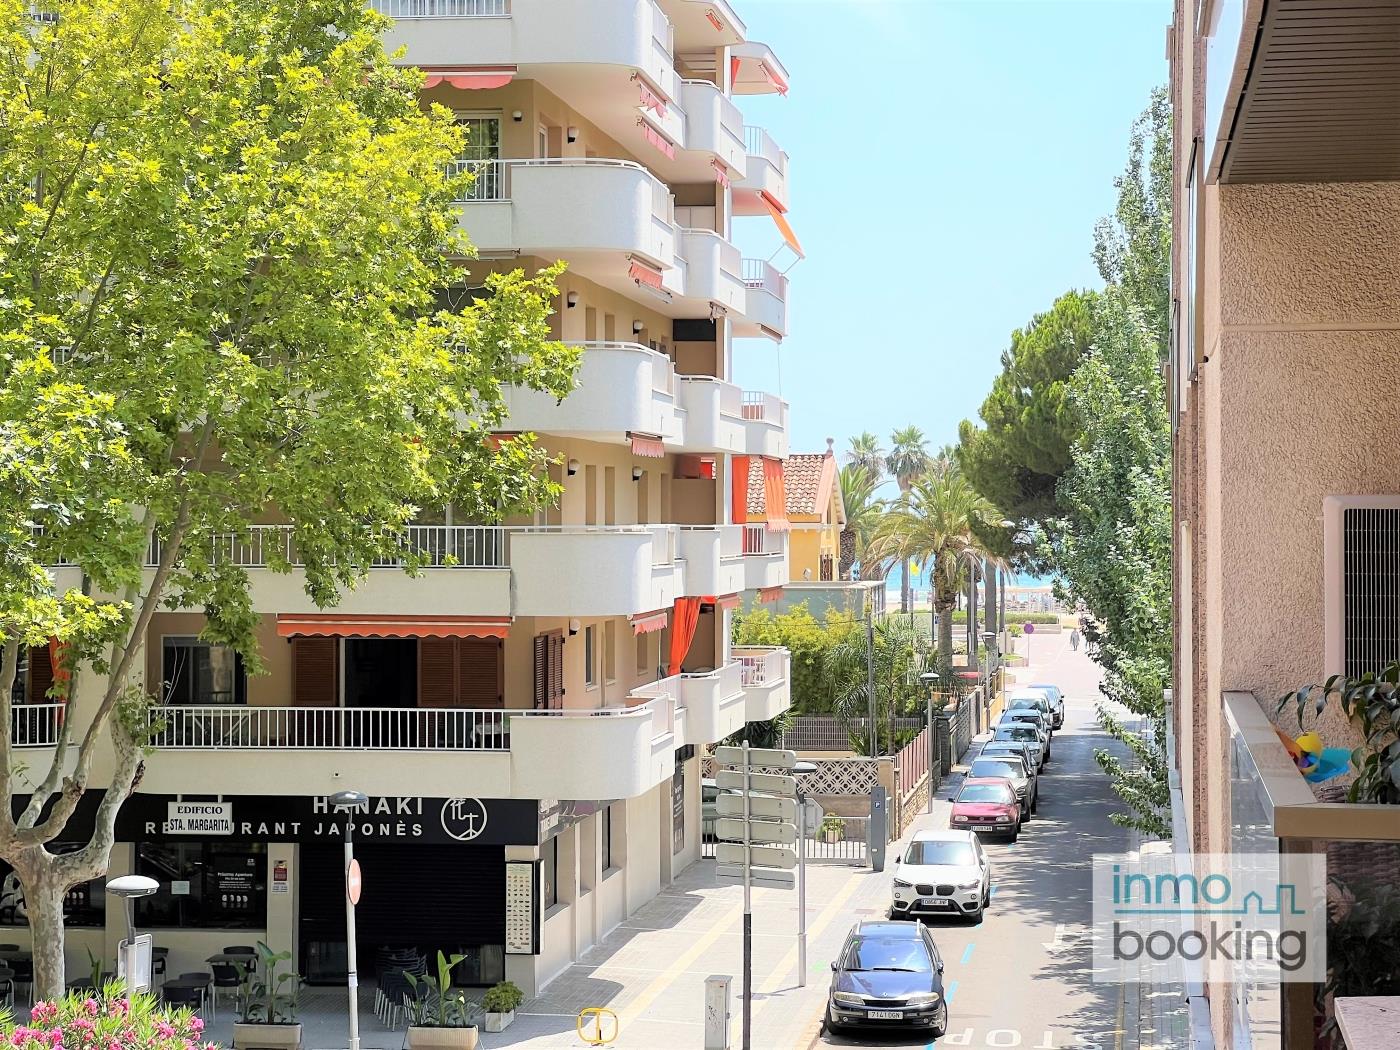 Nice apartment in the heart of Salou. Air-conditioned and close to the beach in Salou